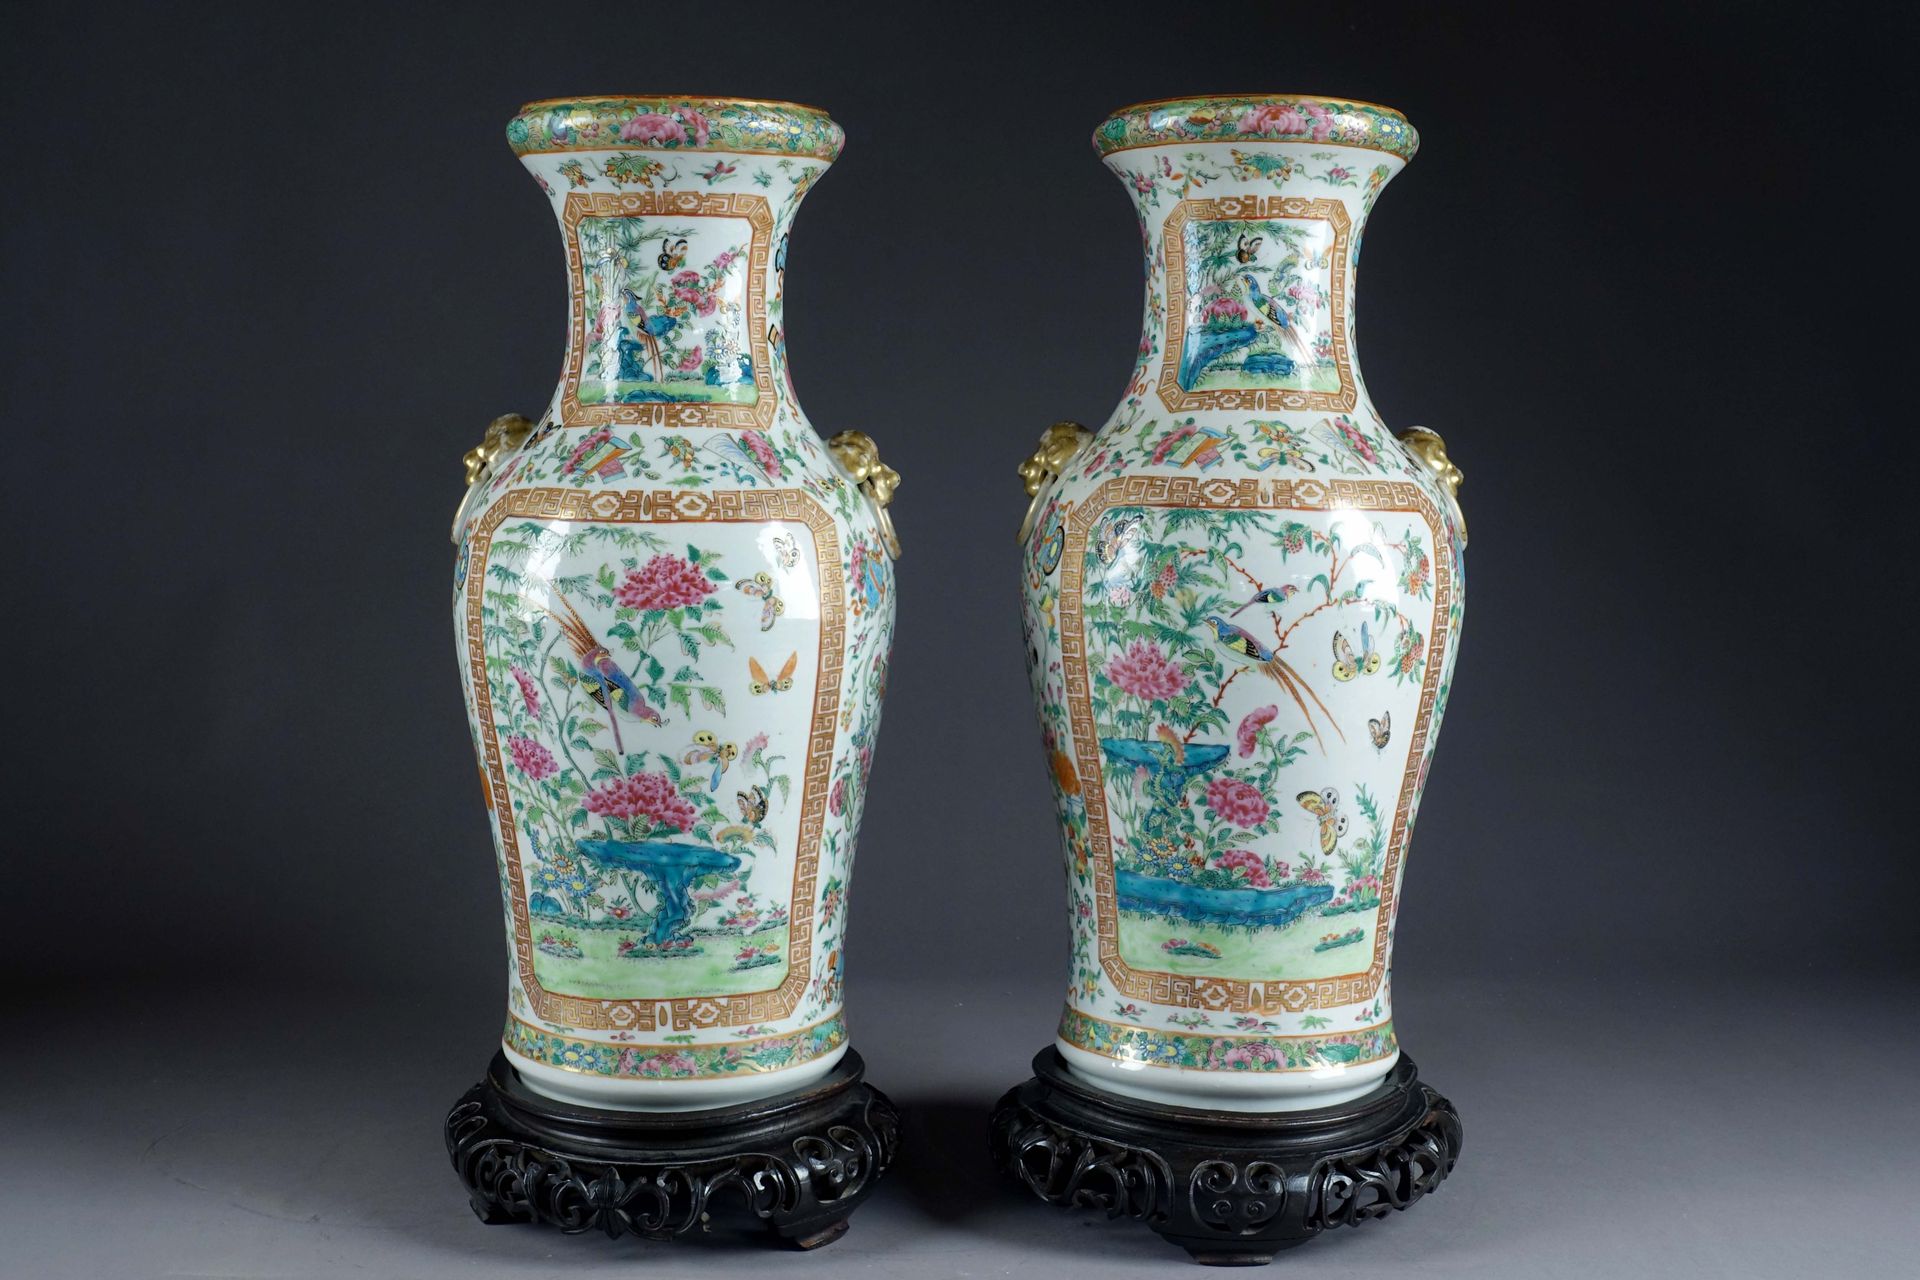 CANTON. Pair of large baluster vases with handles simulating rings. Decorated wi&hellip;